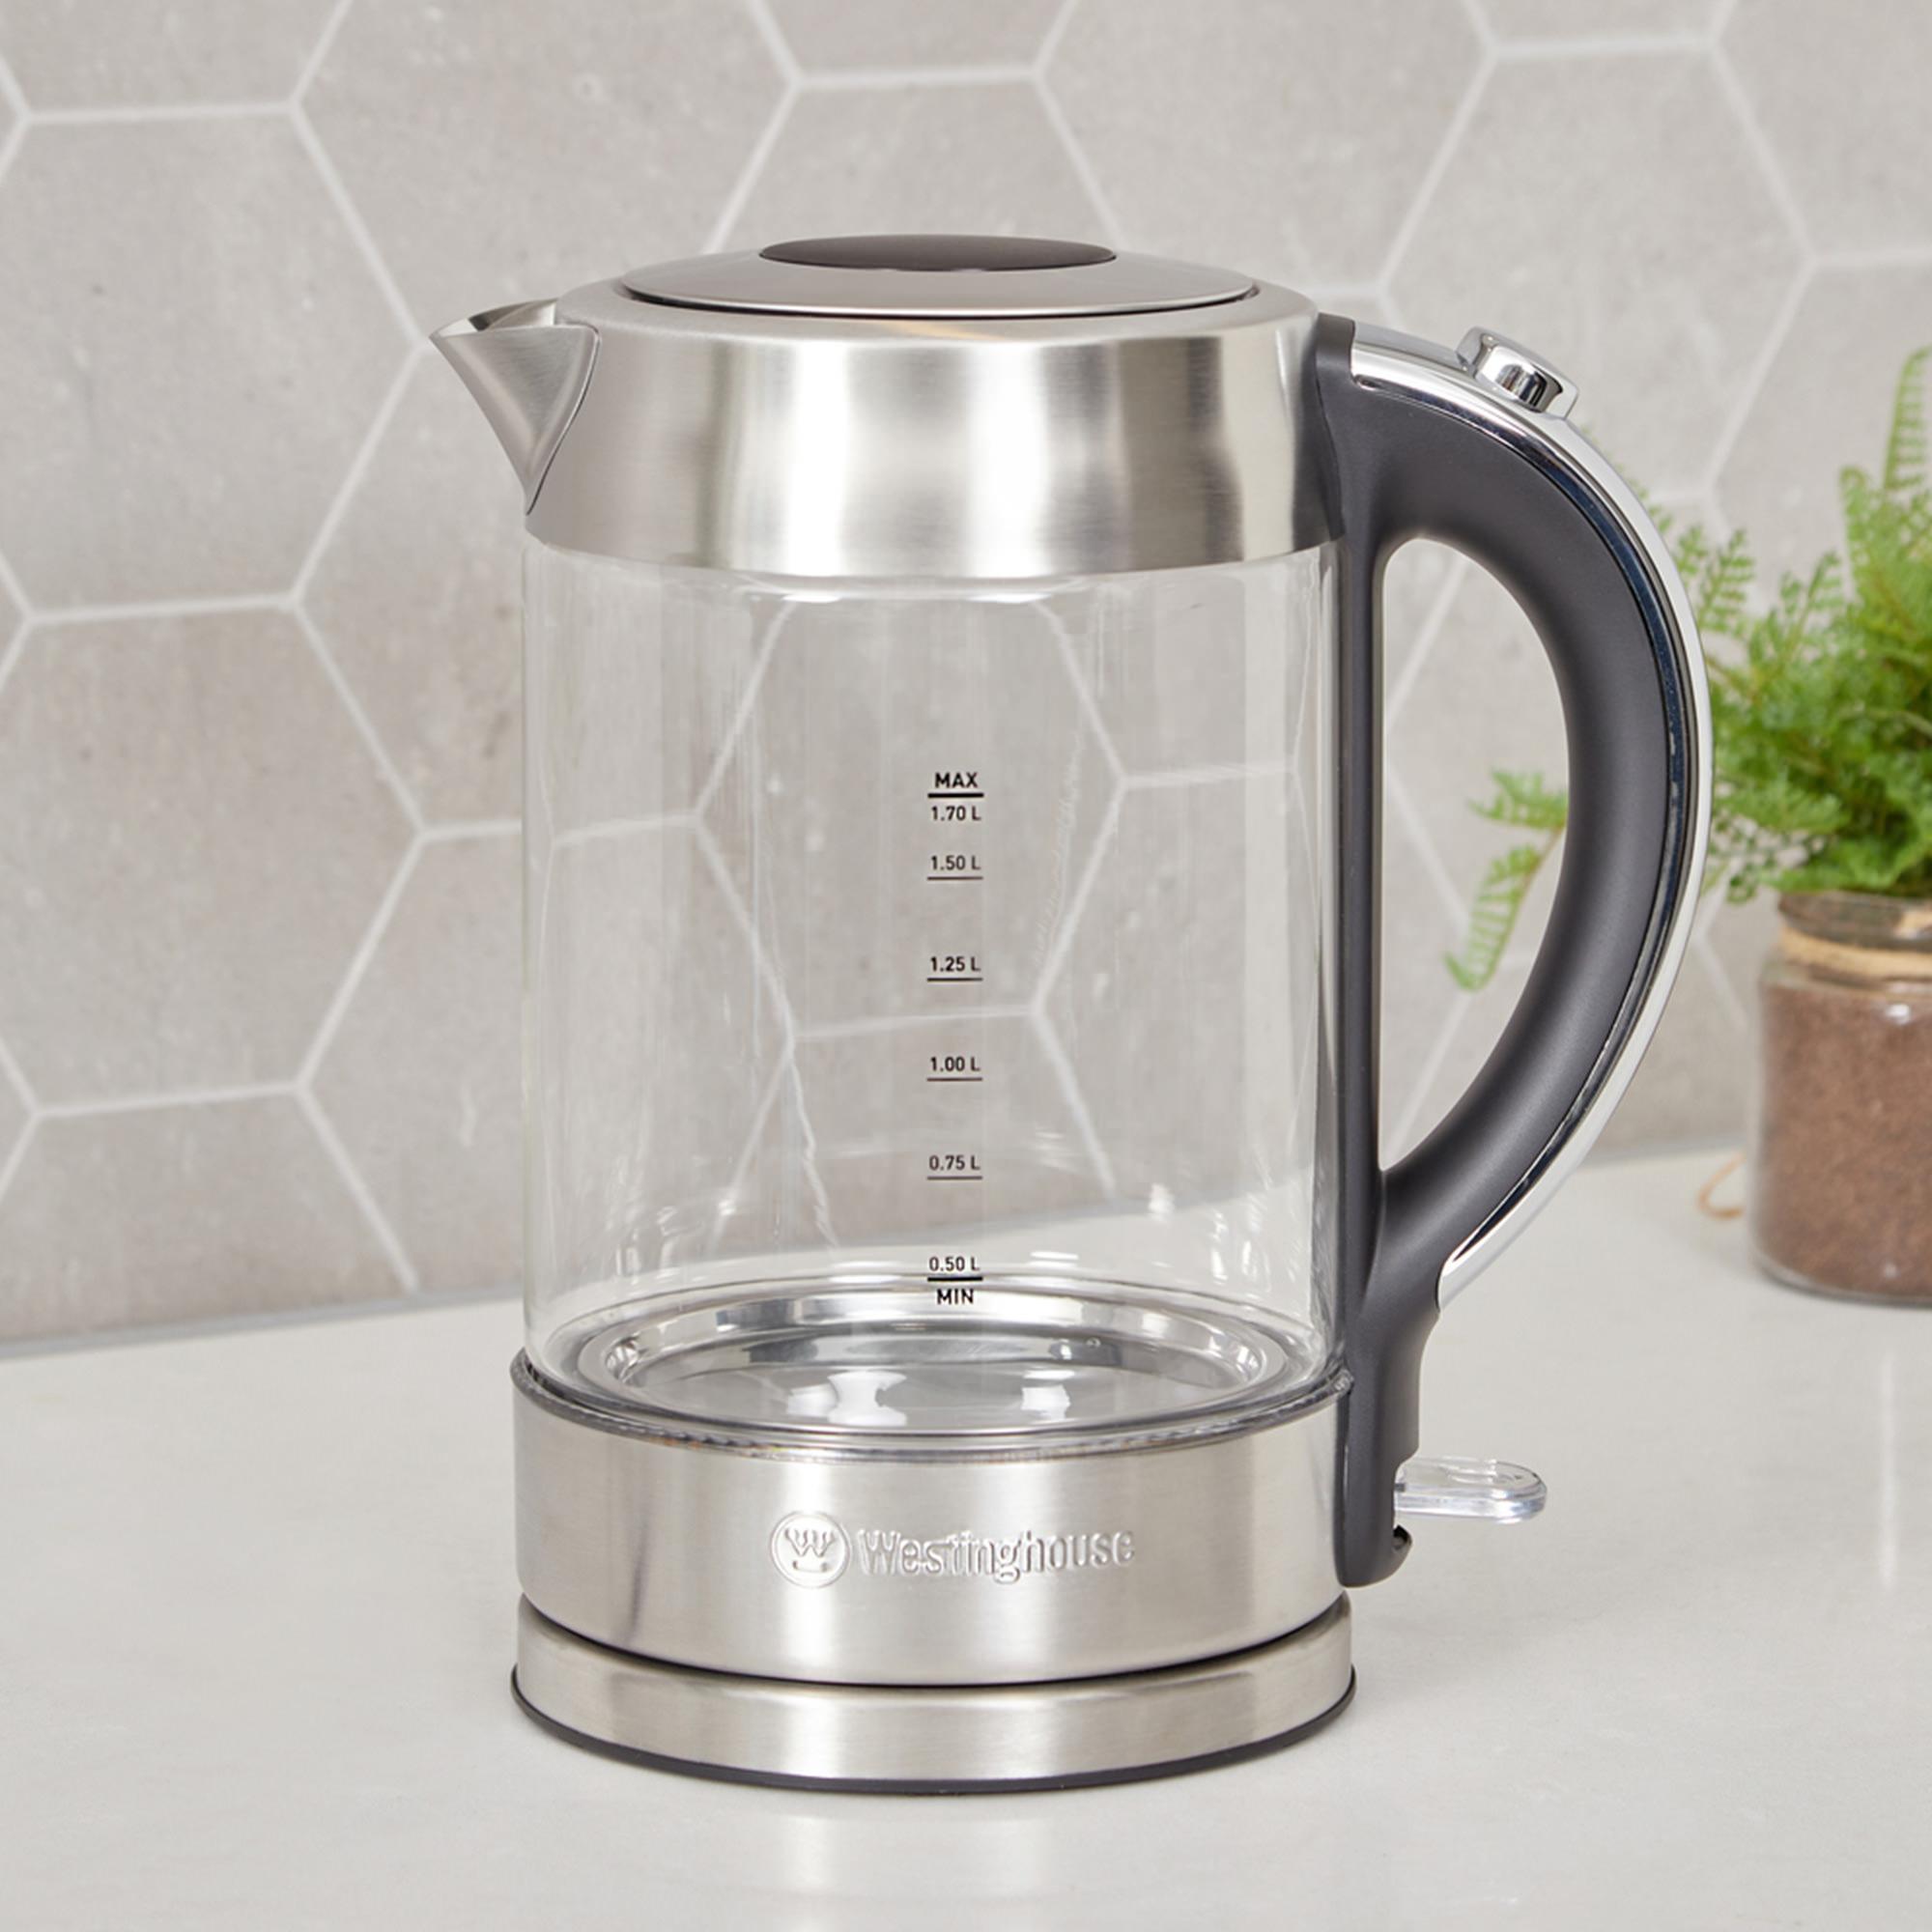 Westinghouse Deluxe Glass Kettle 1.7L Image 3